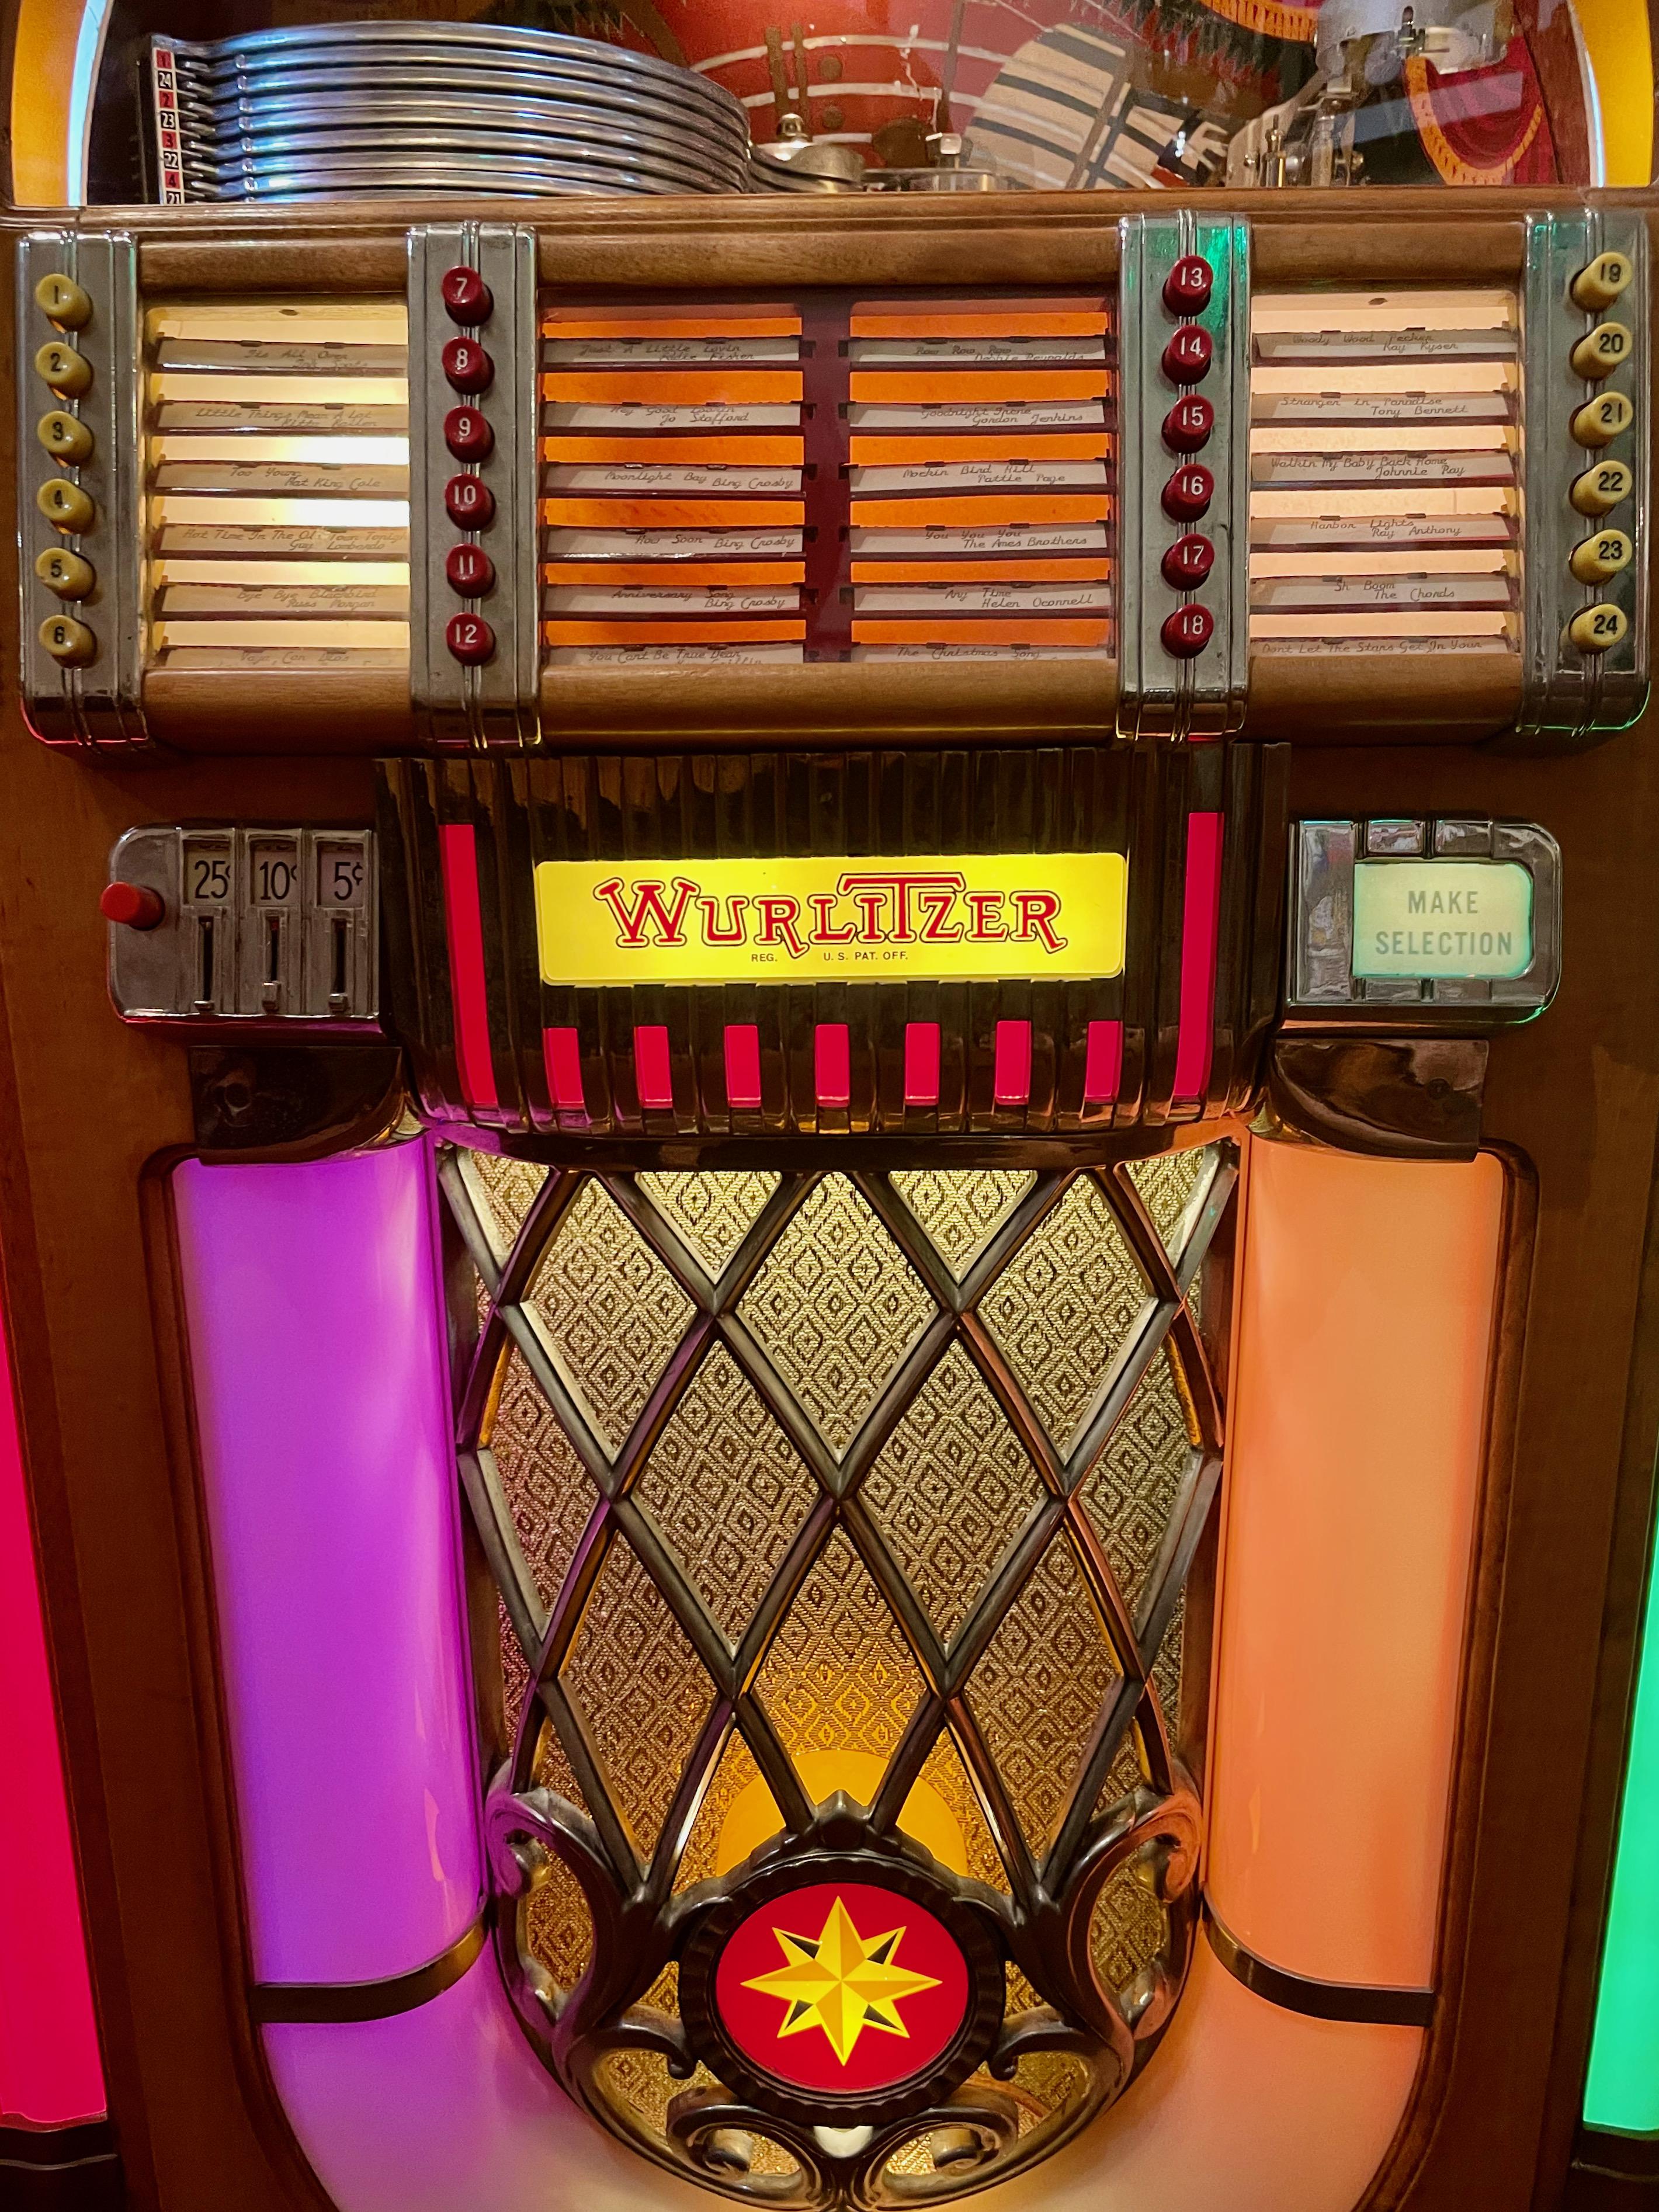 Vintage 1946 Wurlitzer Model 1015 bubbler collector multi-selector phonograph. This Jukebox in excellent condition, fully restored, and with a full set of 78s. The sound is amazing, the amp was rebuilt, the original 15? speaker, coin mechanism works